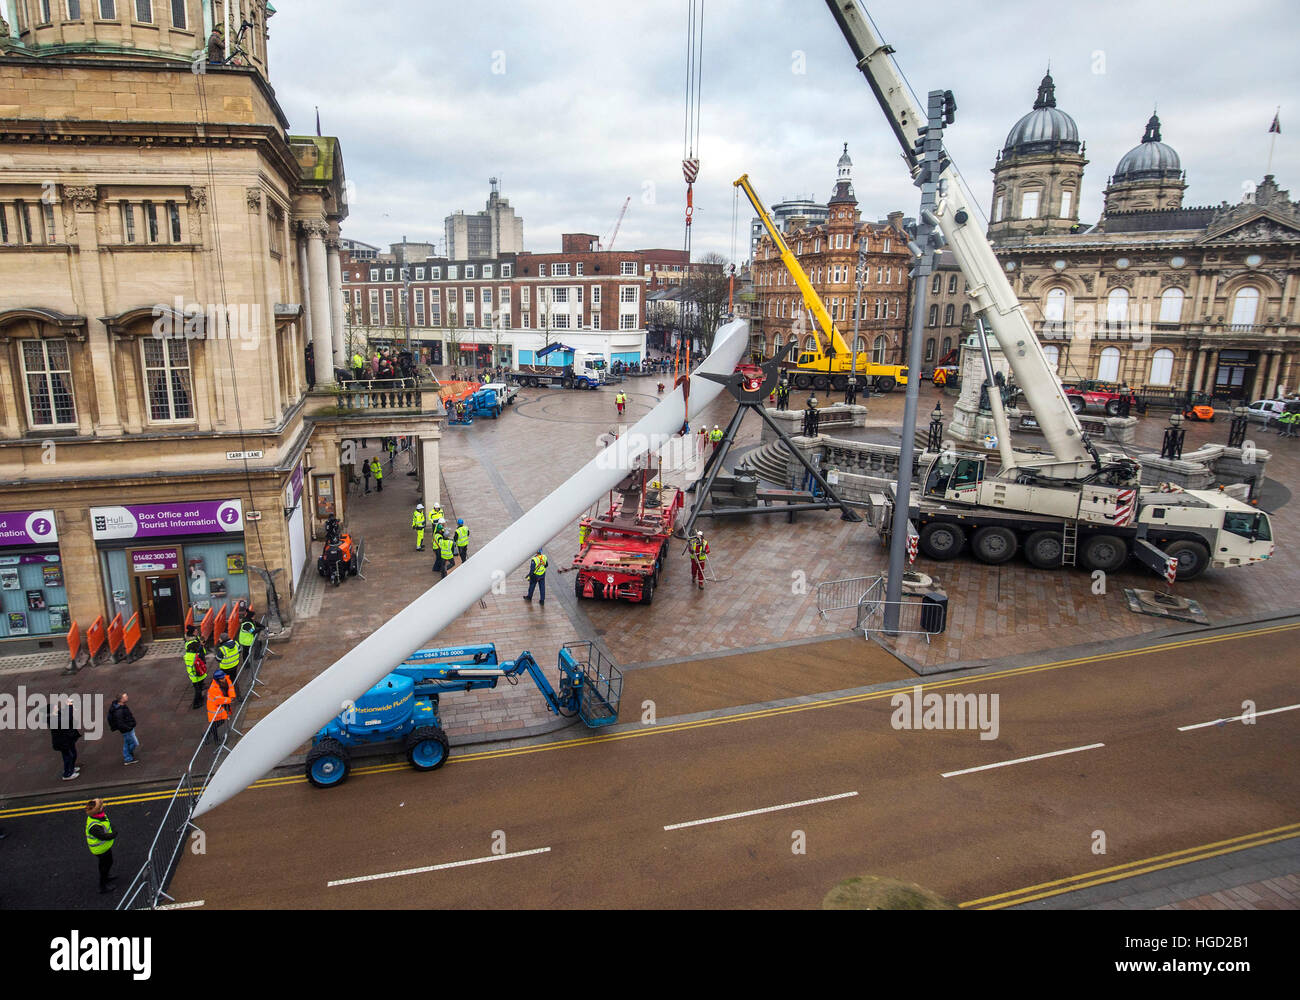 Art work Blade, a 250ft-long (75m) wind turbine, commissioned from multimedia artist Nayan Kulkarni and created by workers at the Siemens factory in Hull, is installed at Queen Victoria Square in Hull. Stock Photo